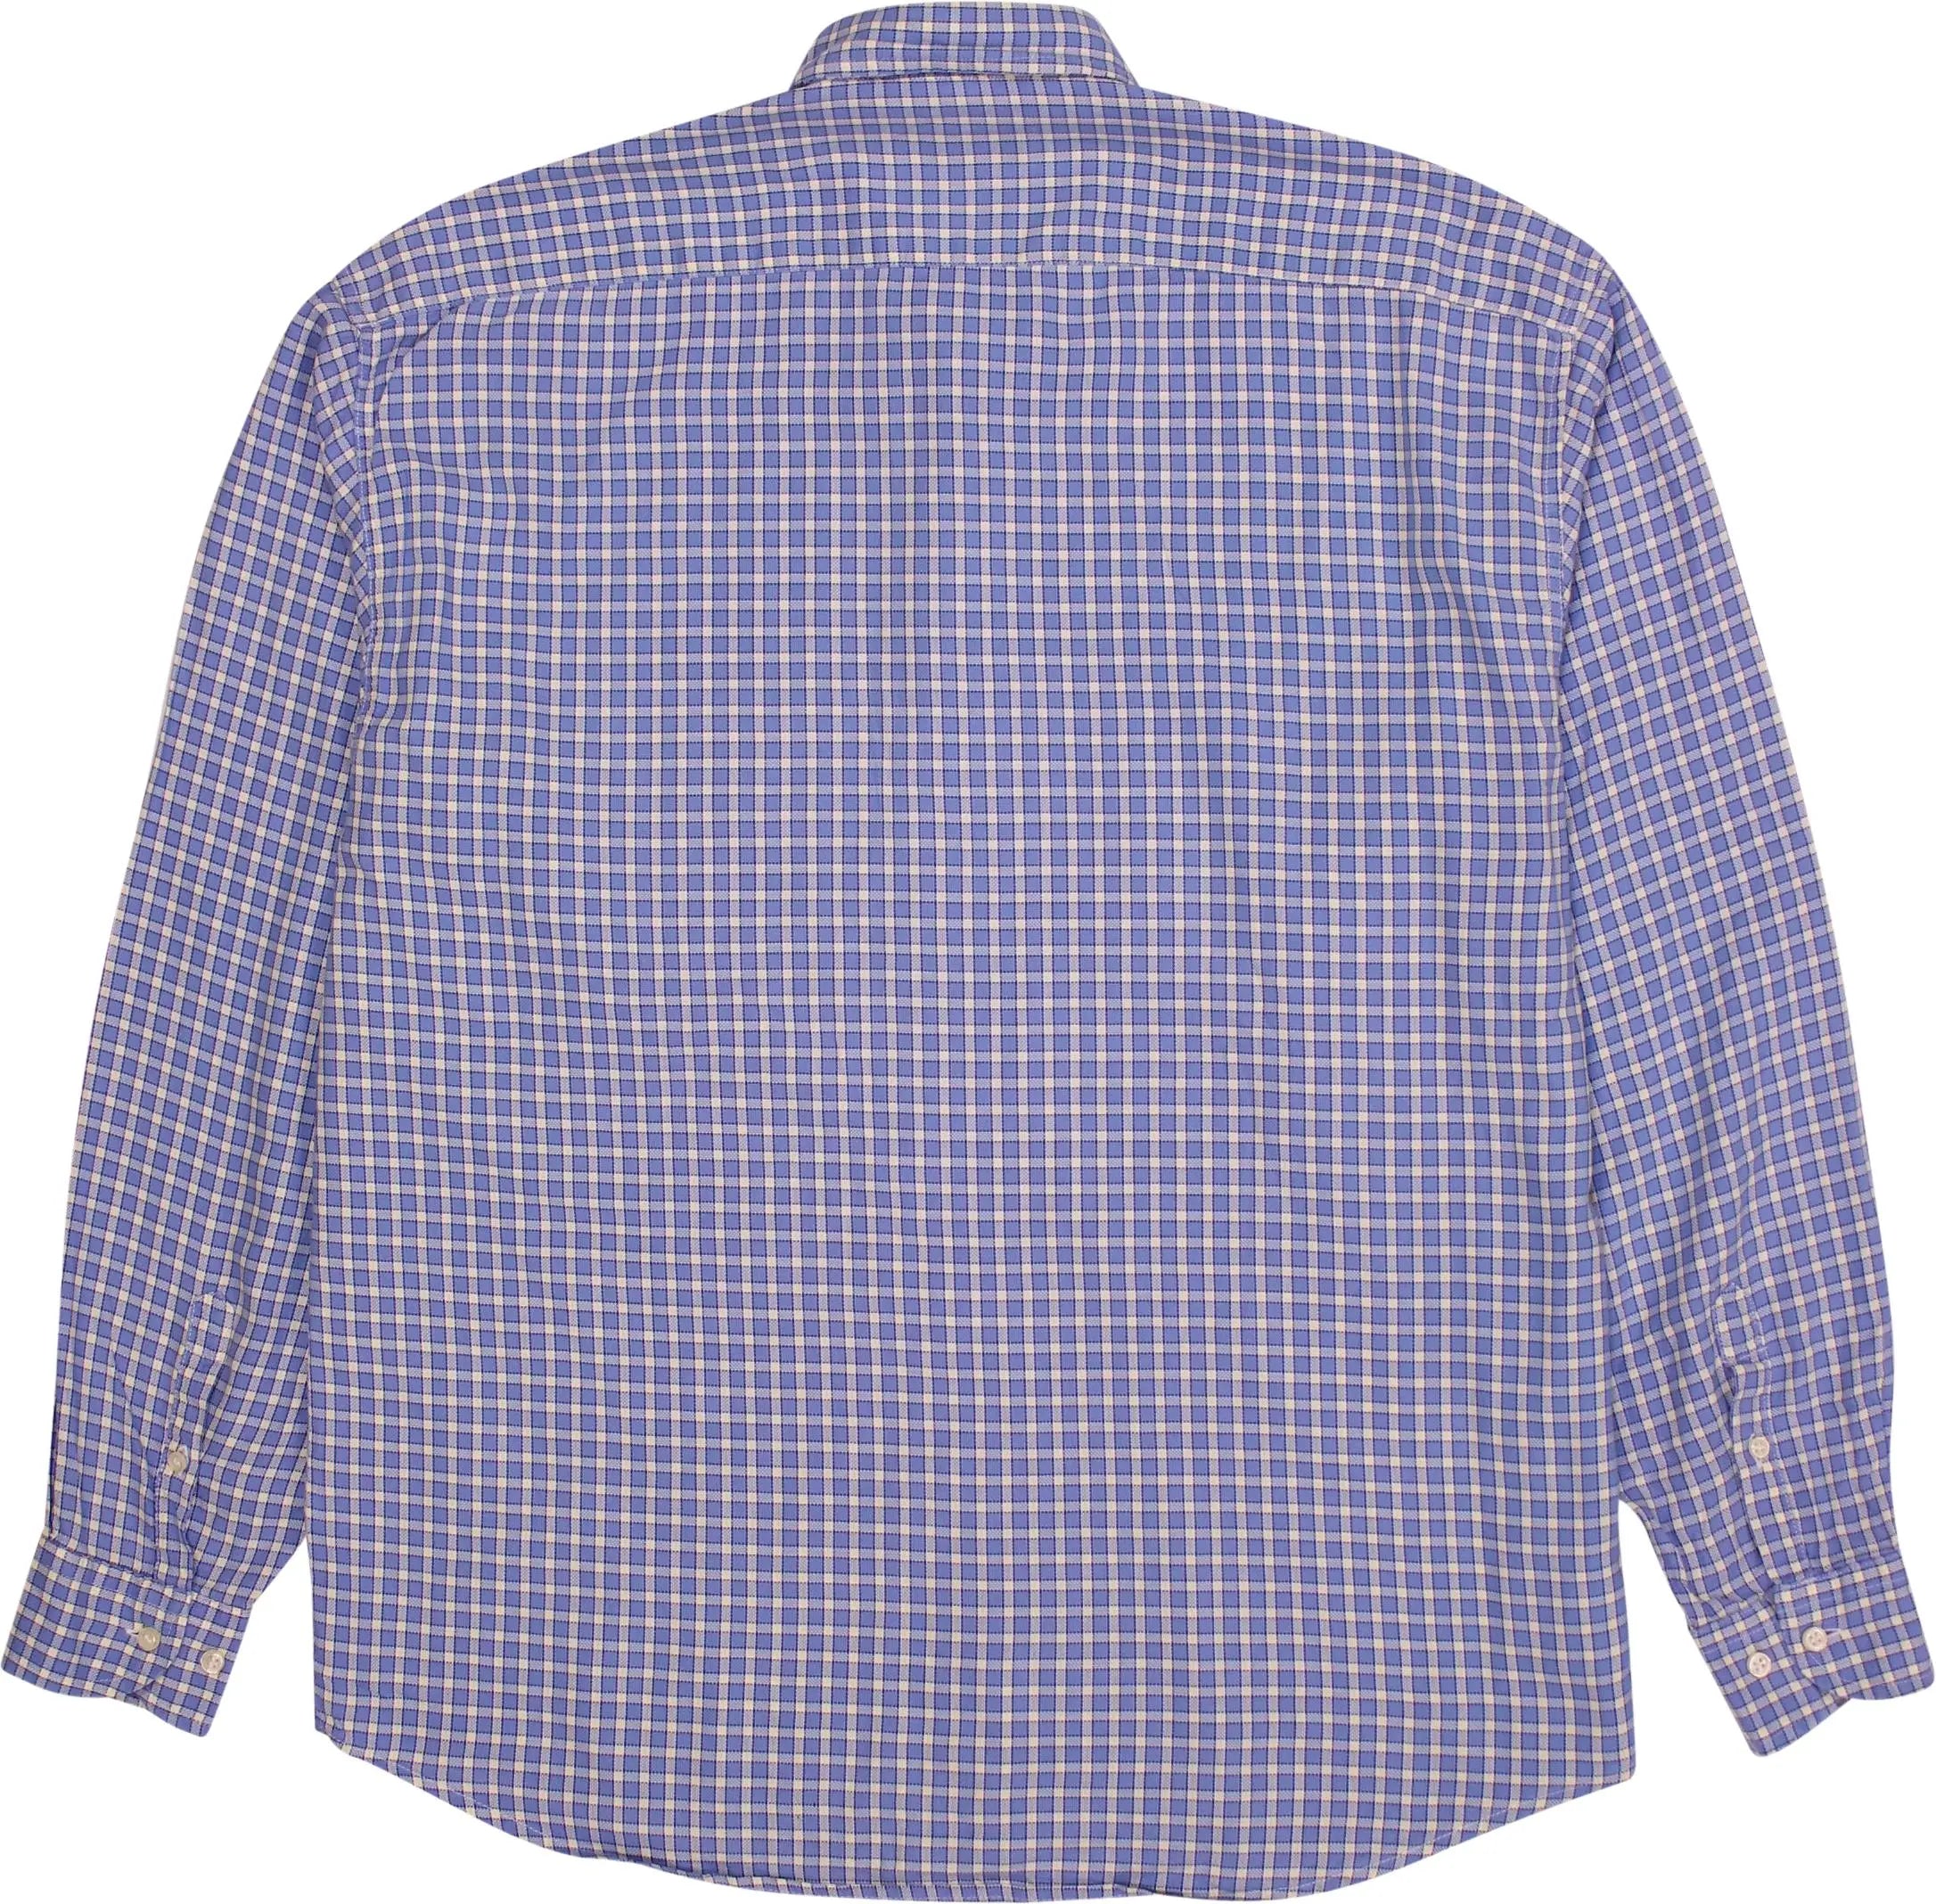 Fila - Blue Checked Shirt by Fila- ThriftTale.com - Vintage and second handclothing